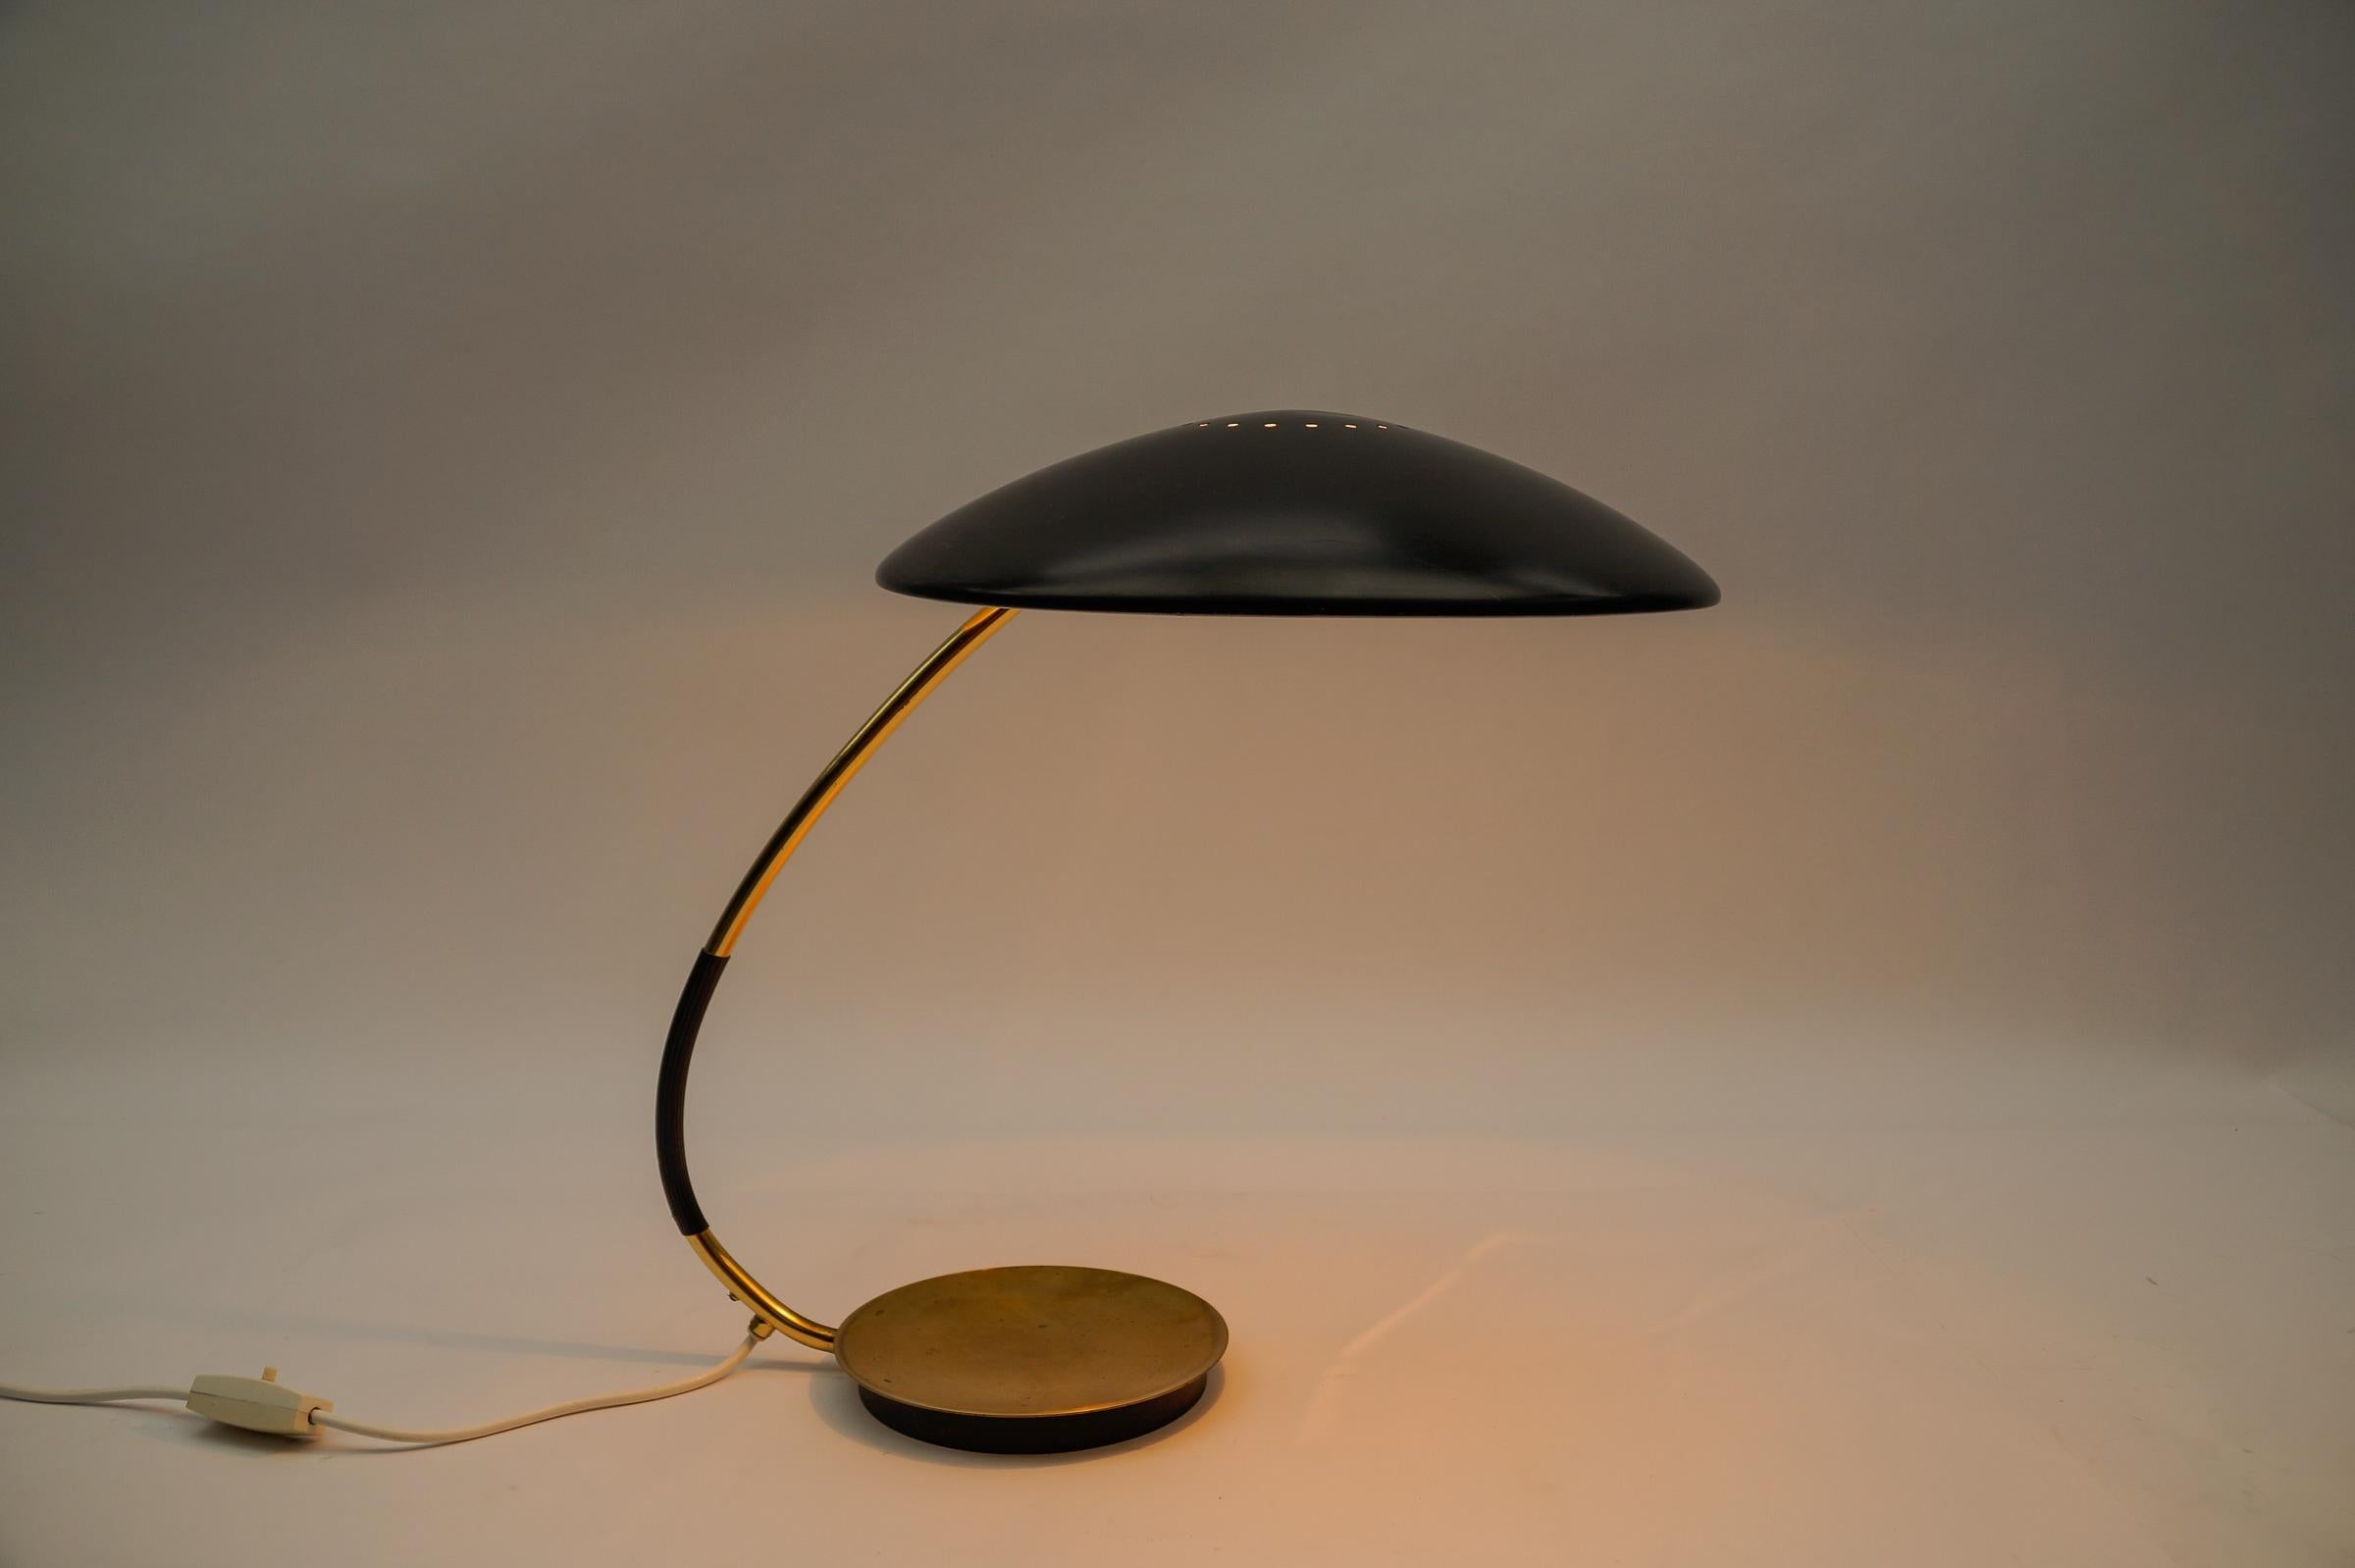 Metal Mid-Century Modern Table Lamp by Kaiser Leuchten, 1950s, Germany For Sale